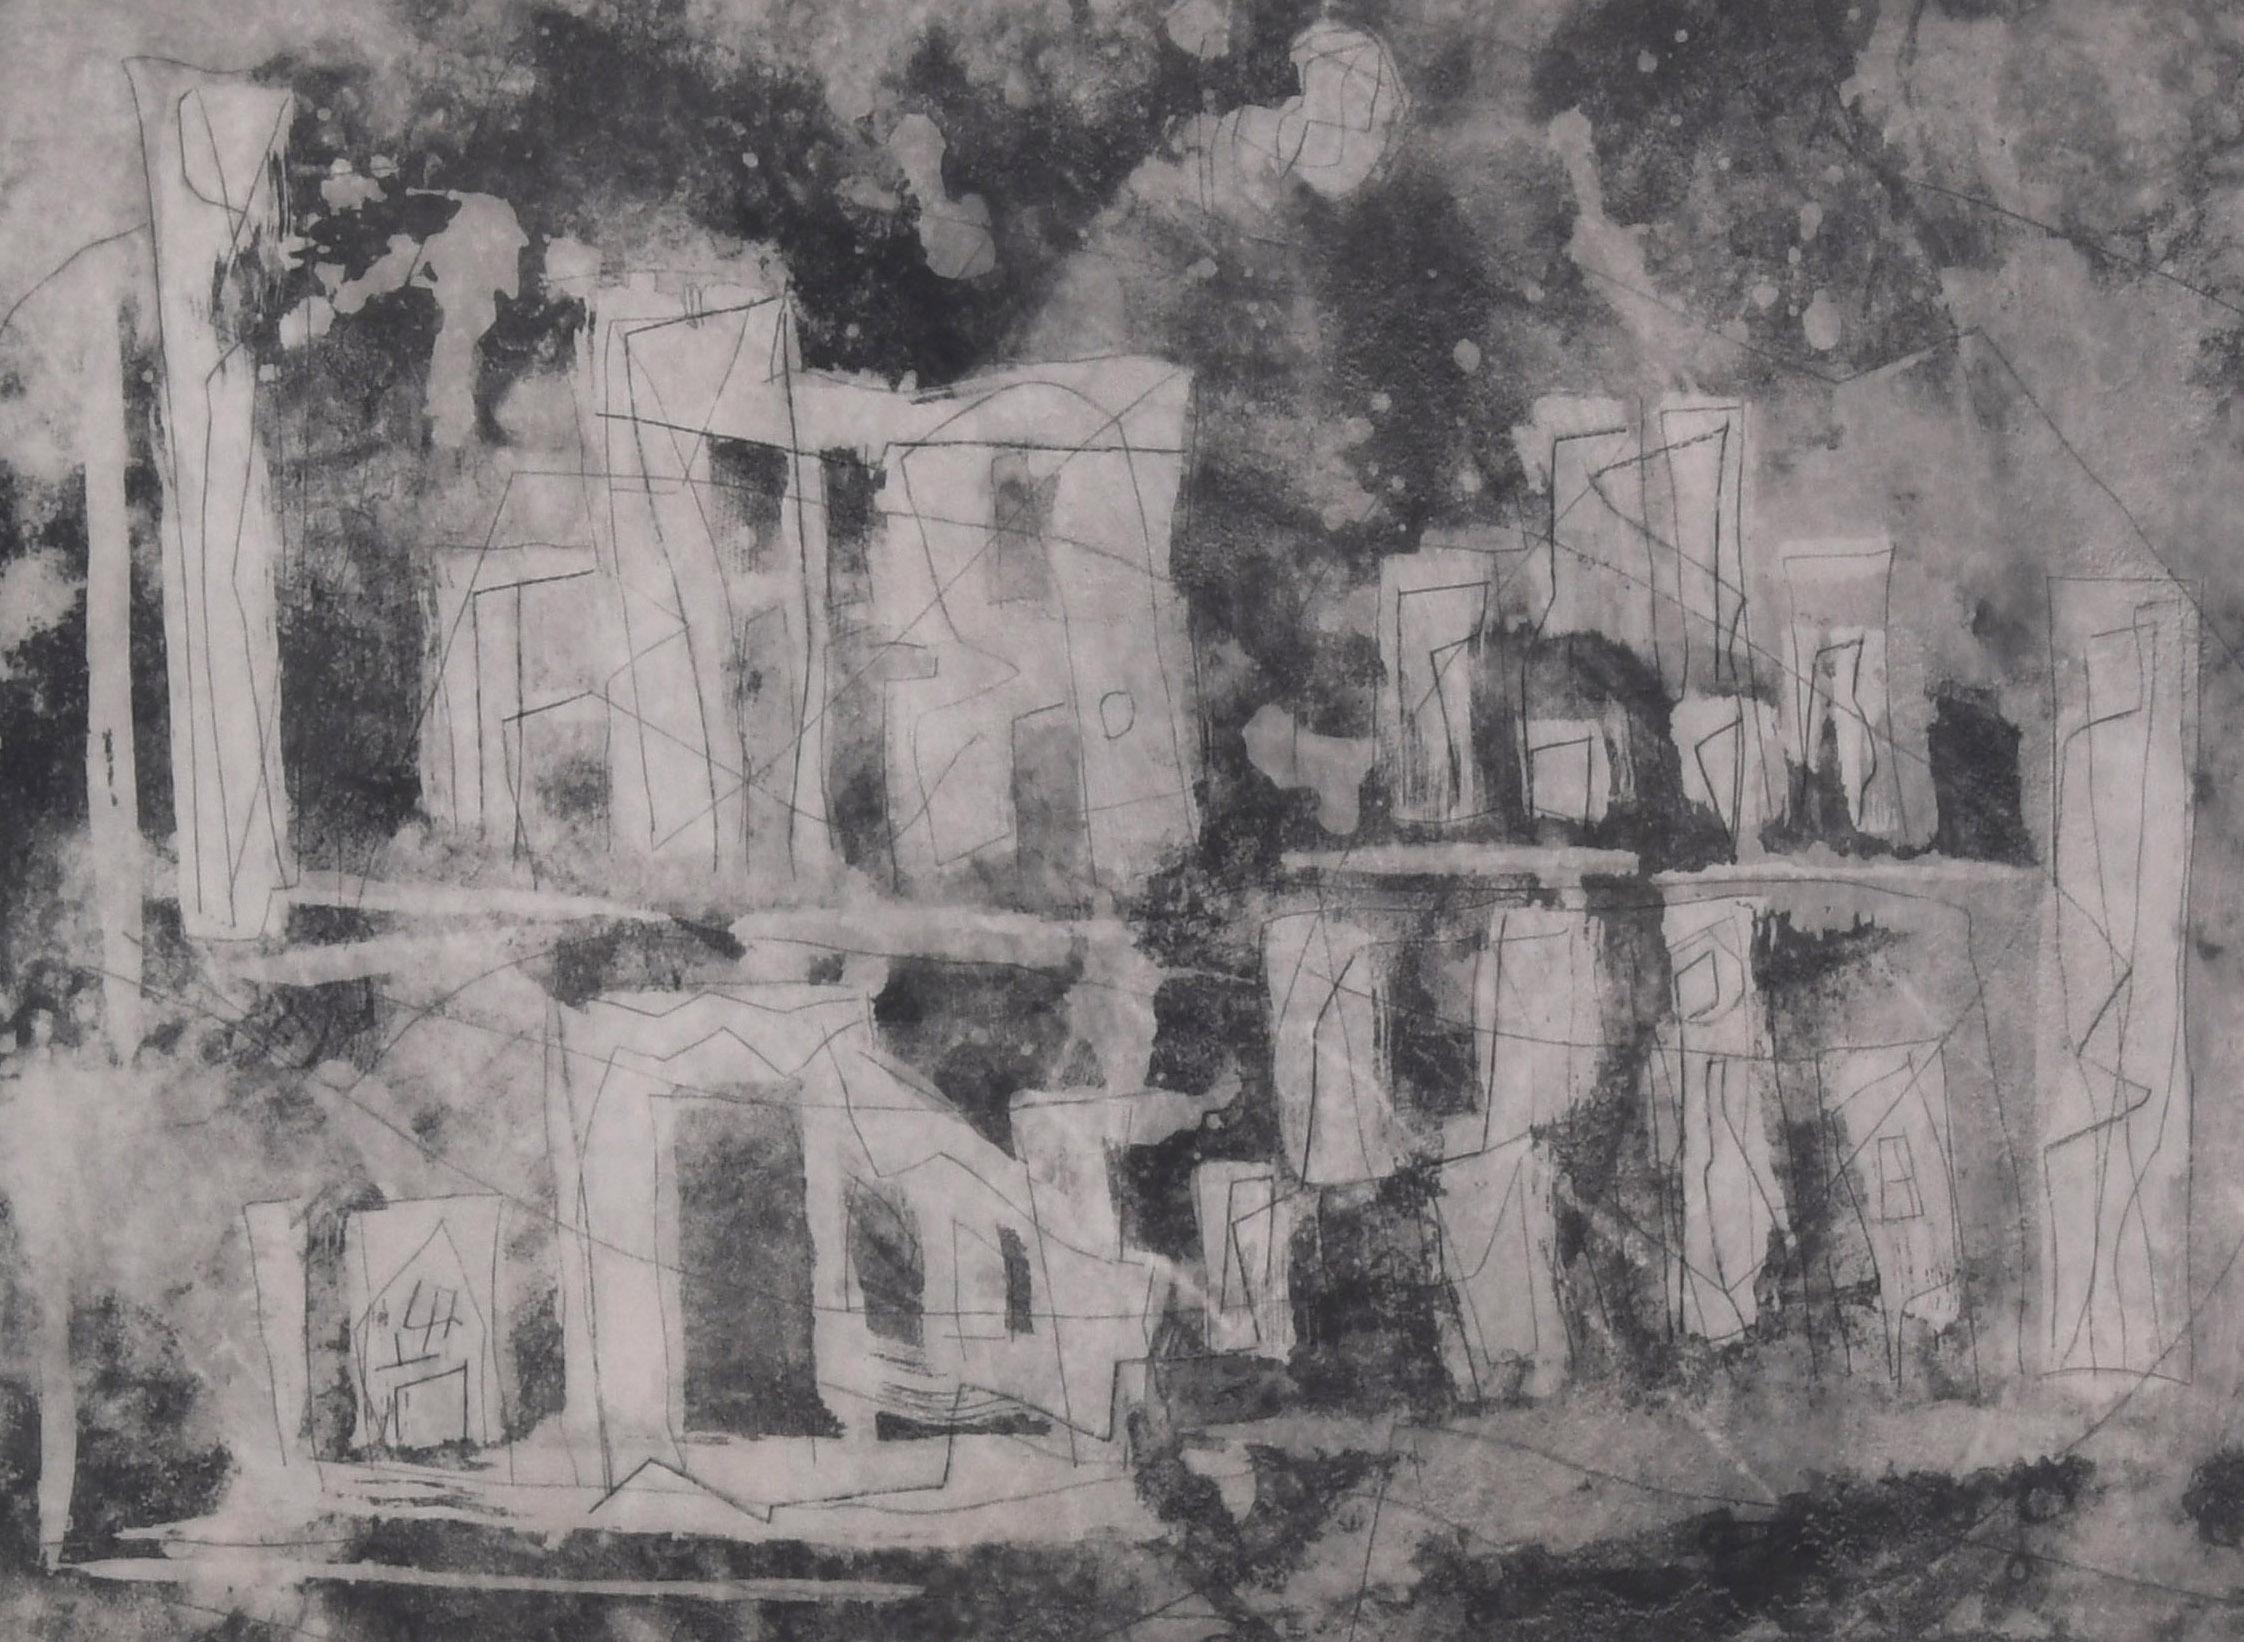 Ancient Landscape II (Ancient City)
Etching and drypoint, 1953-55
Signed and titled in pencil by the artist (see photos)
Annotated: 